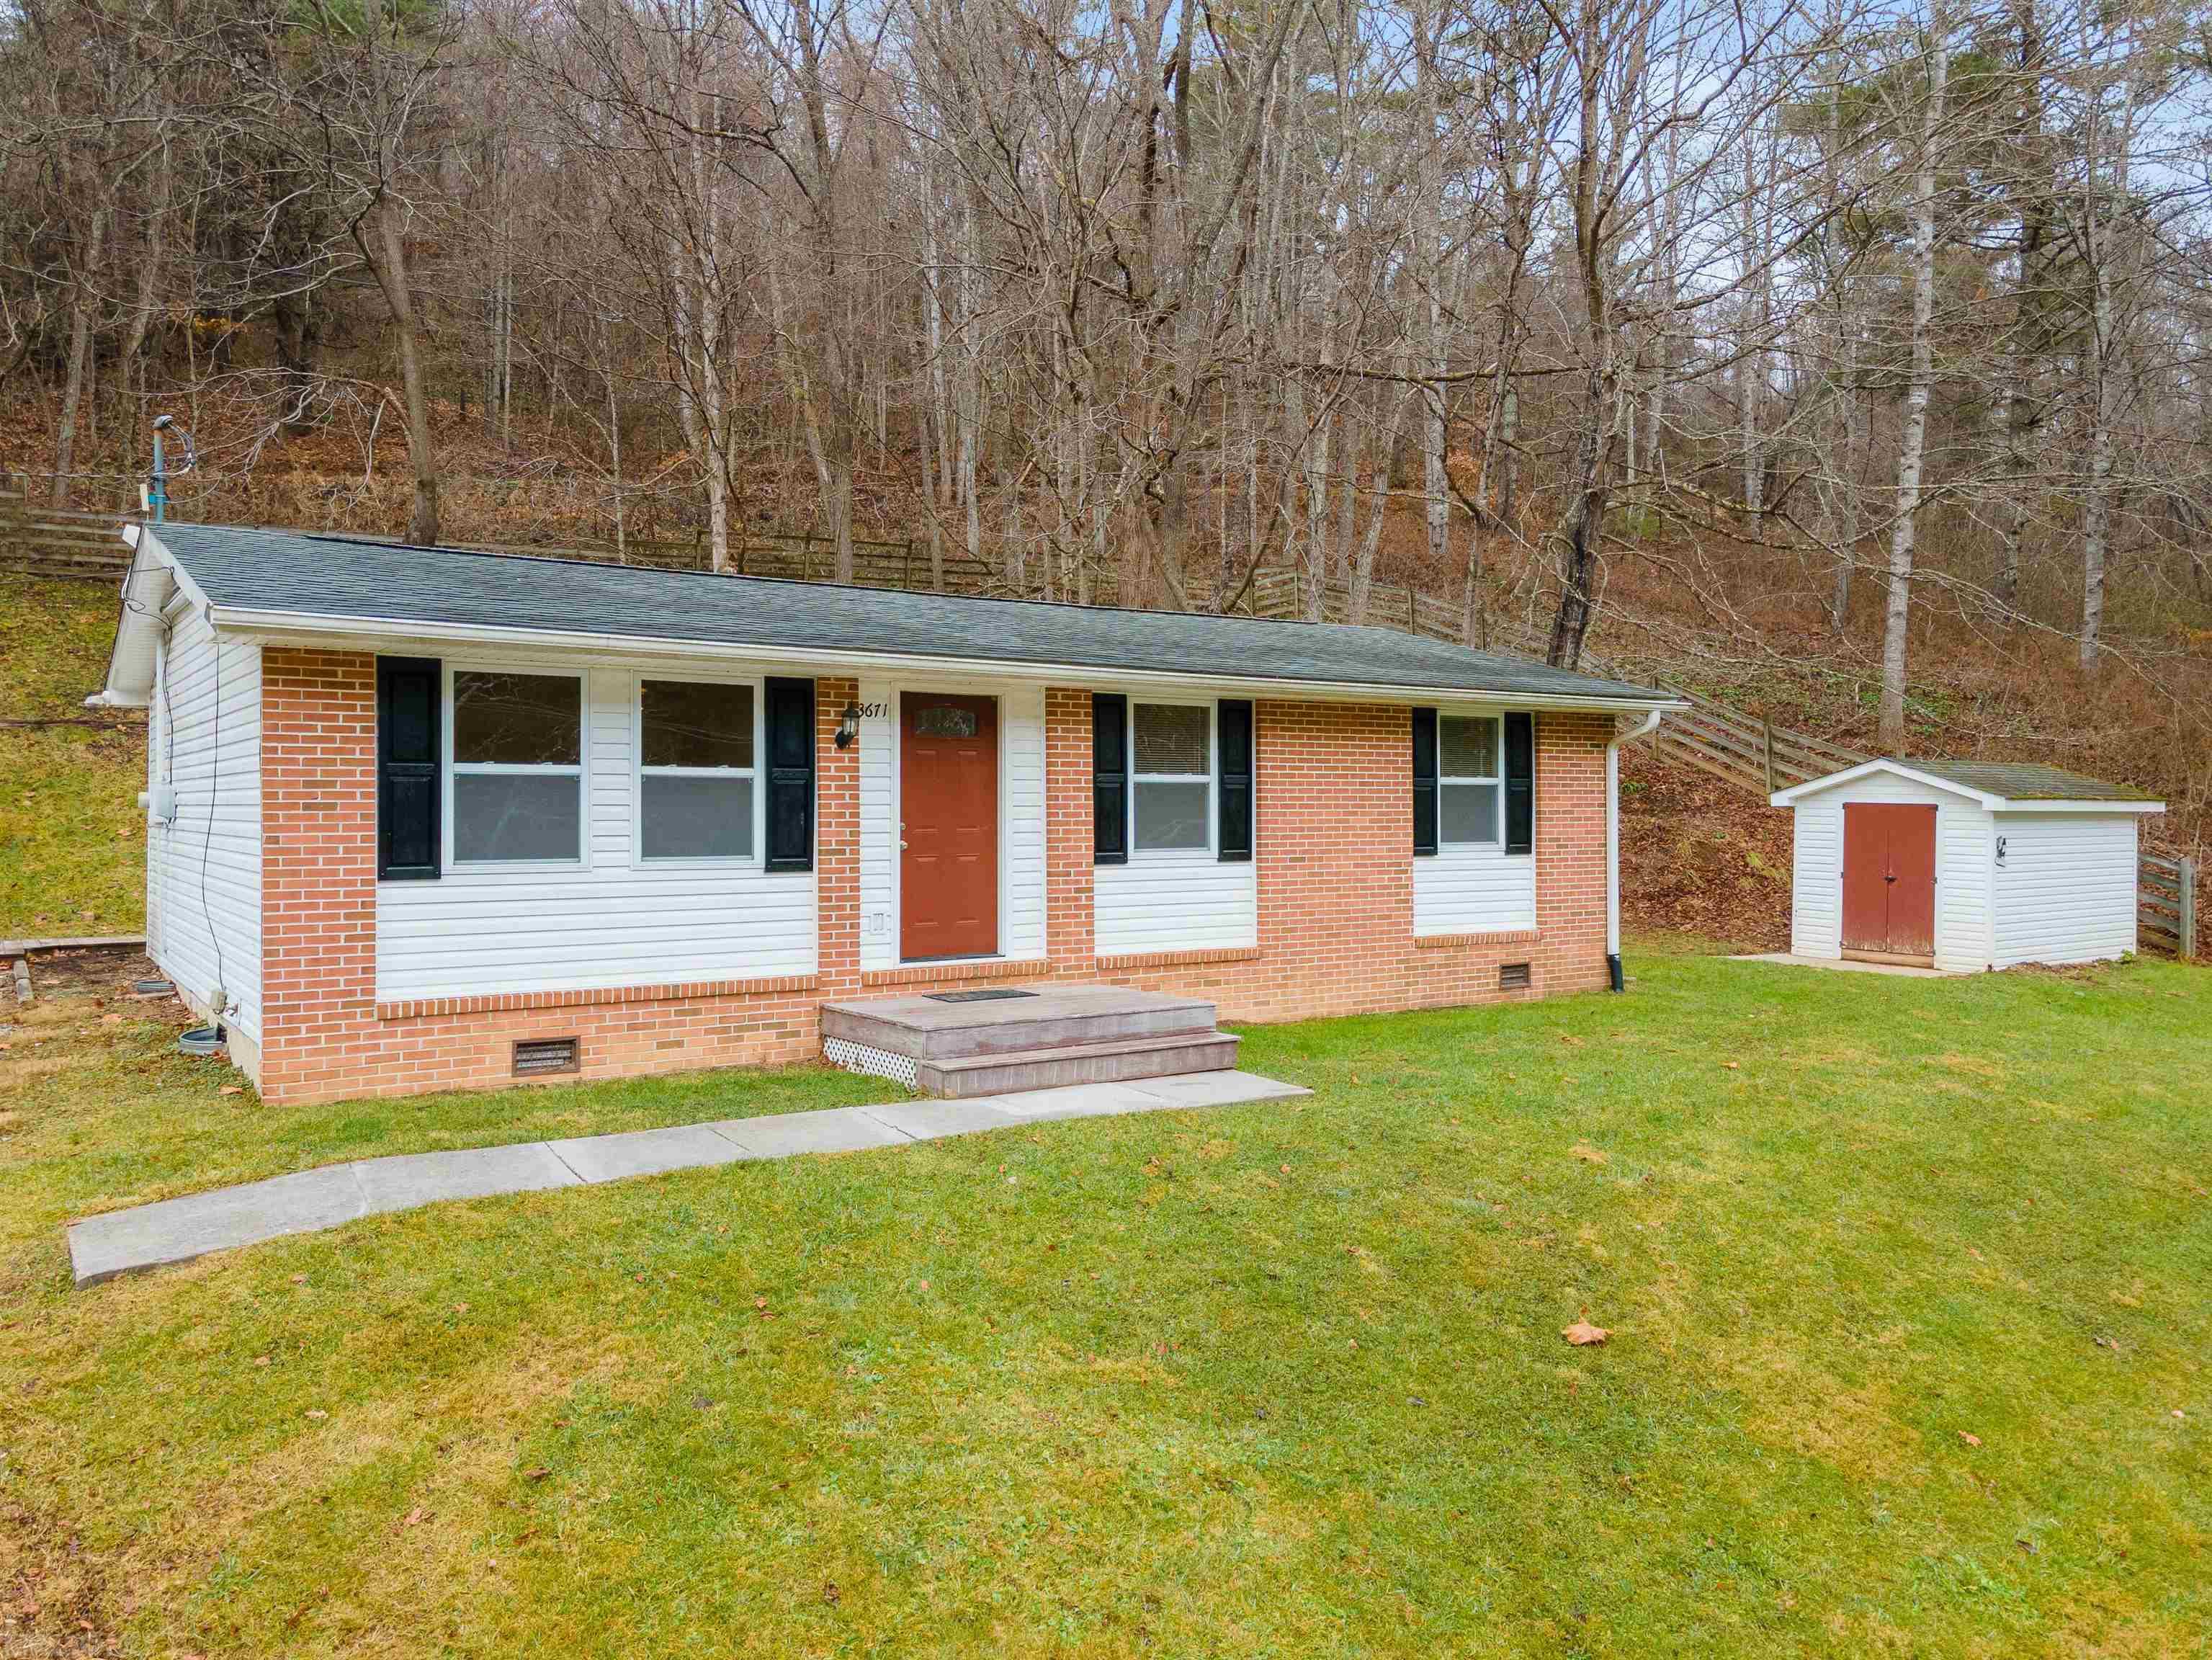 This 3 bedroom remodeled, move-in ready ranch home offers the new owner a great floor plan, upgraded kitchen, hardwoods floors in common areas, and fresh interior paint. All kitchen appliances and washer/dryer convey. Large back deck and storage building with power. Only minutes to downtown Christiansburg, in Auburn School district. Call to schedule your visit today!